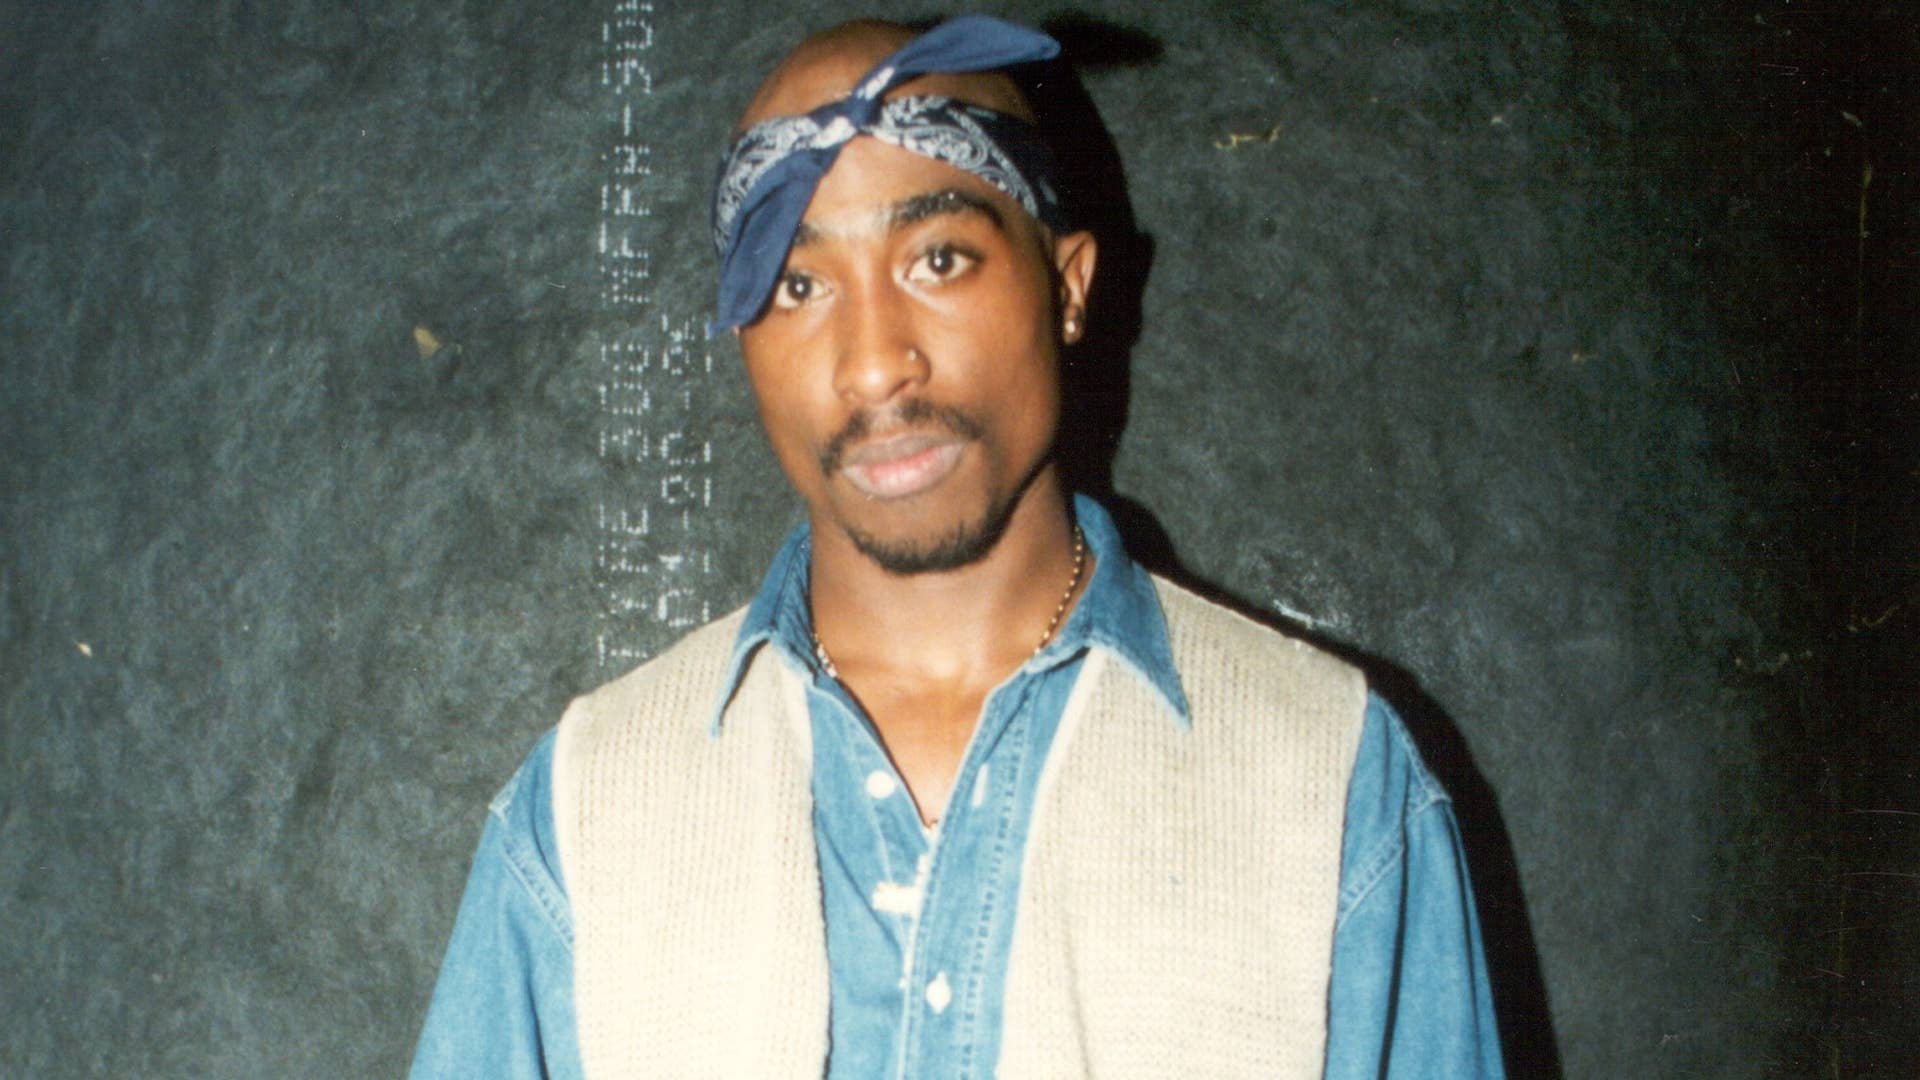 2Pac poses backstage after a show